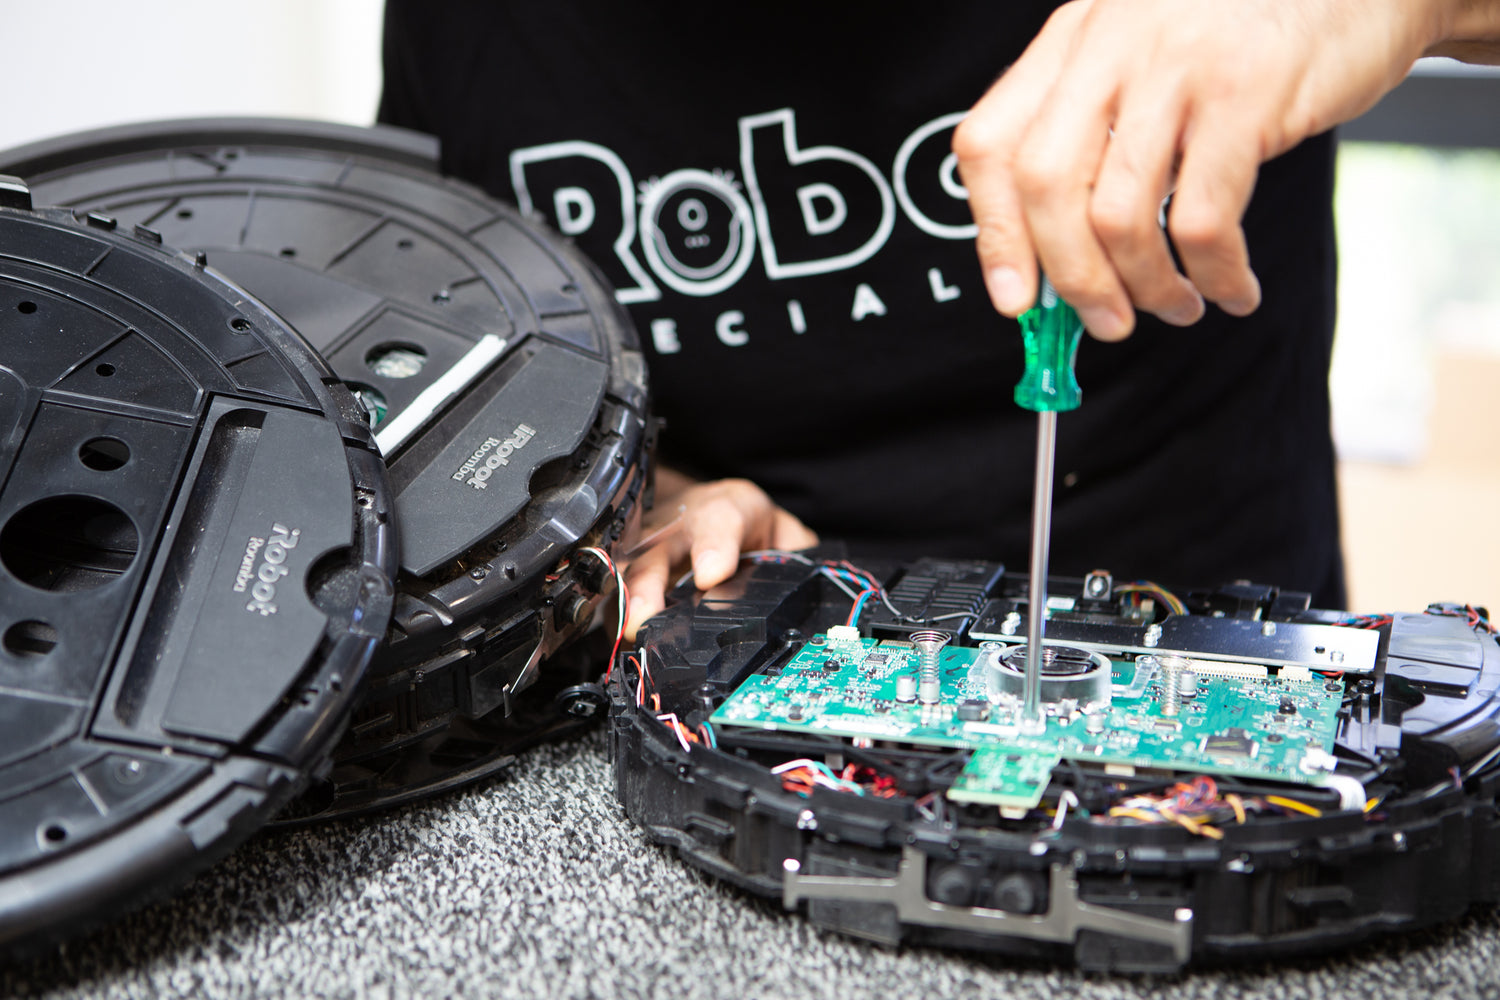 Are you a tech-savvy individual with a passion for robotics and electronics? If so, we have an exciting opportunity for you at Robot Specialist!